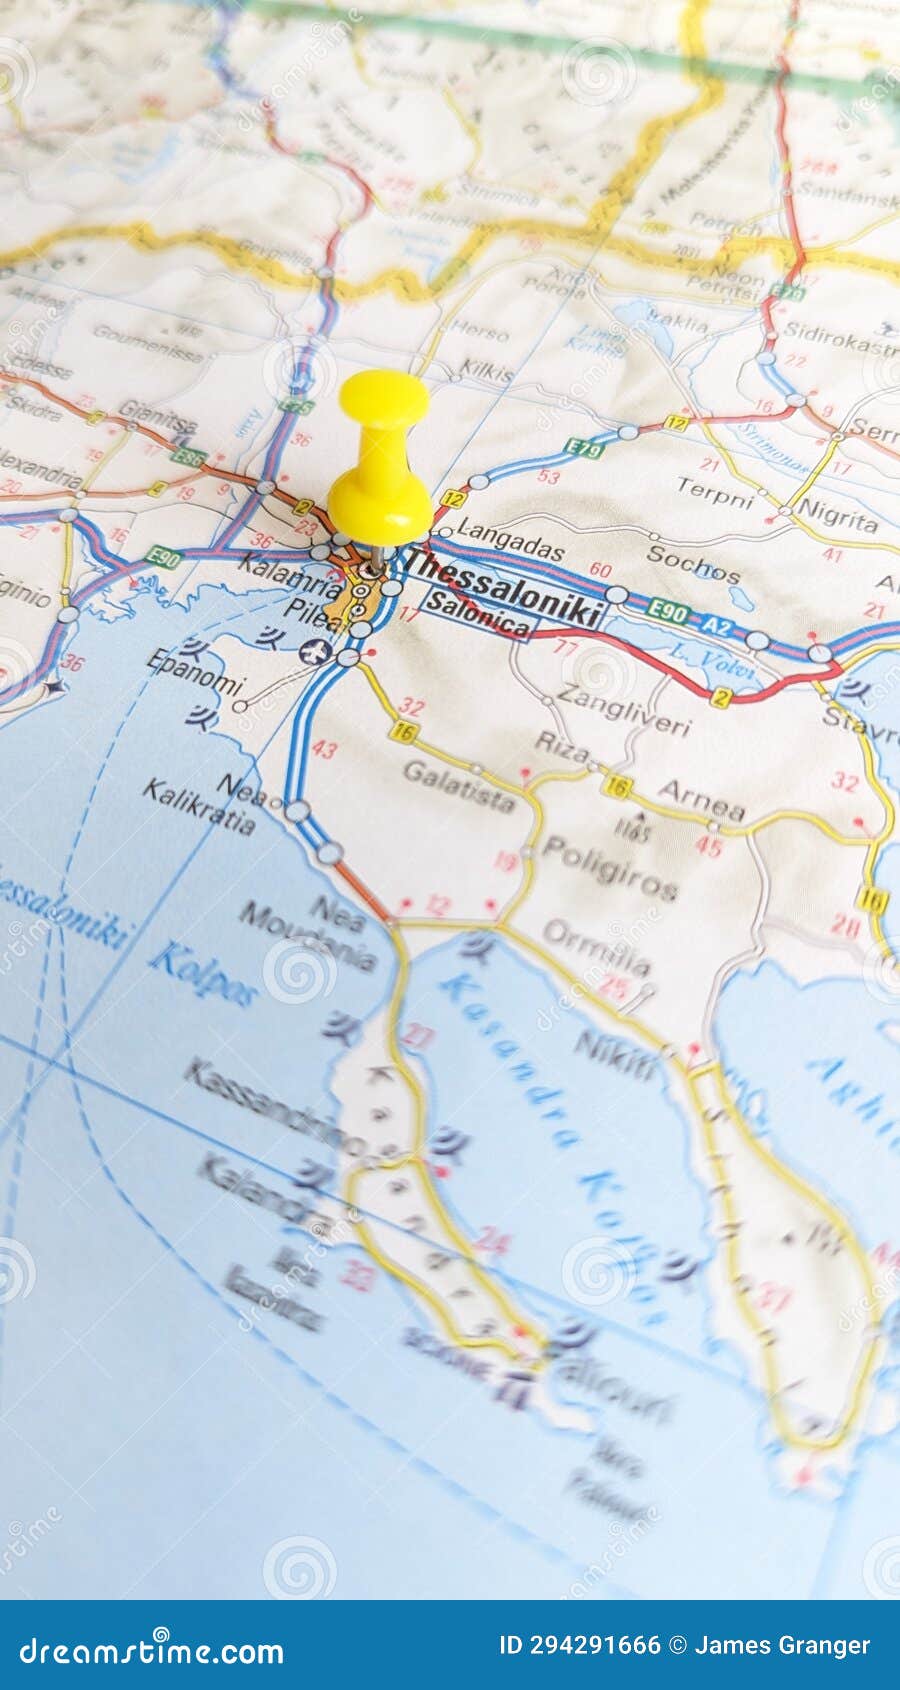 a yellow pin stuck in thessaloniki on a map of greece portrait